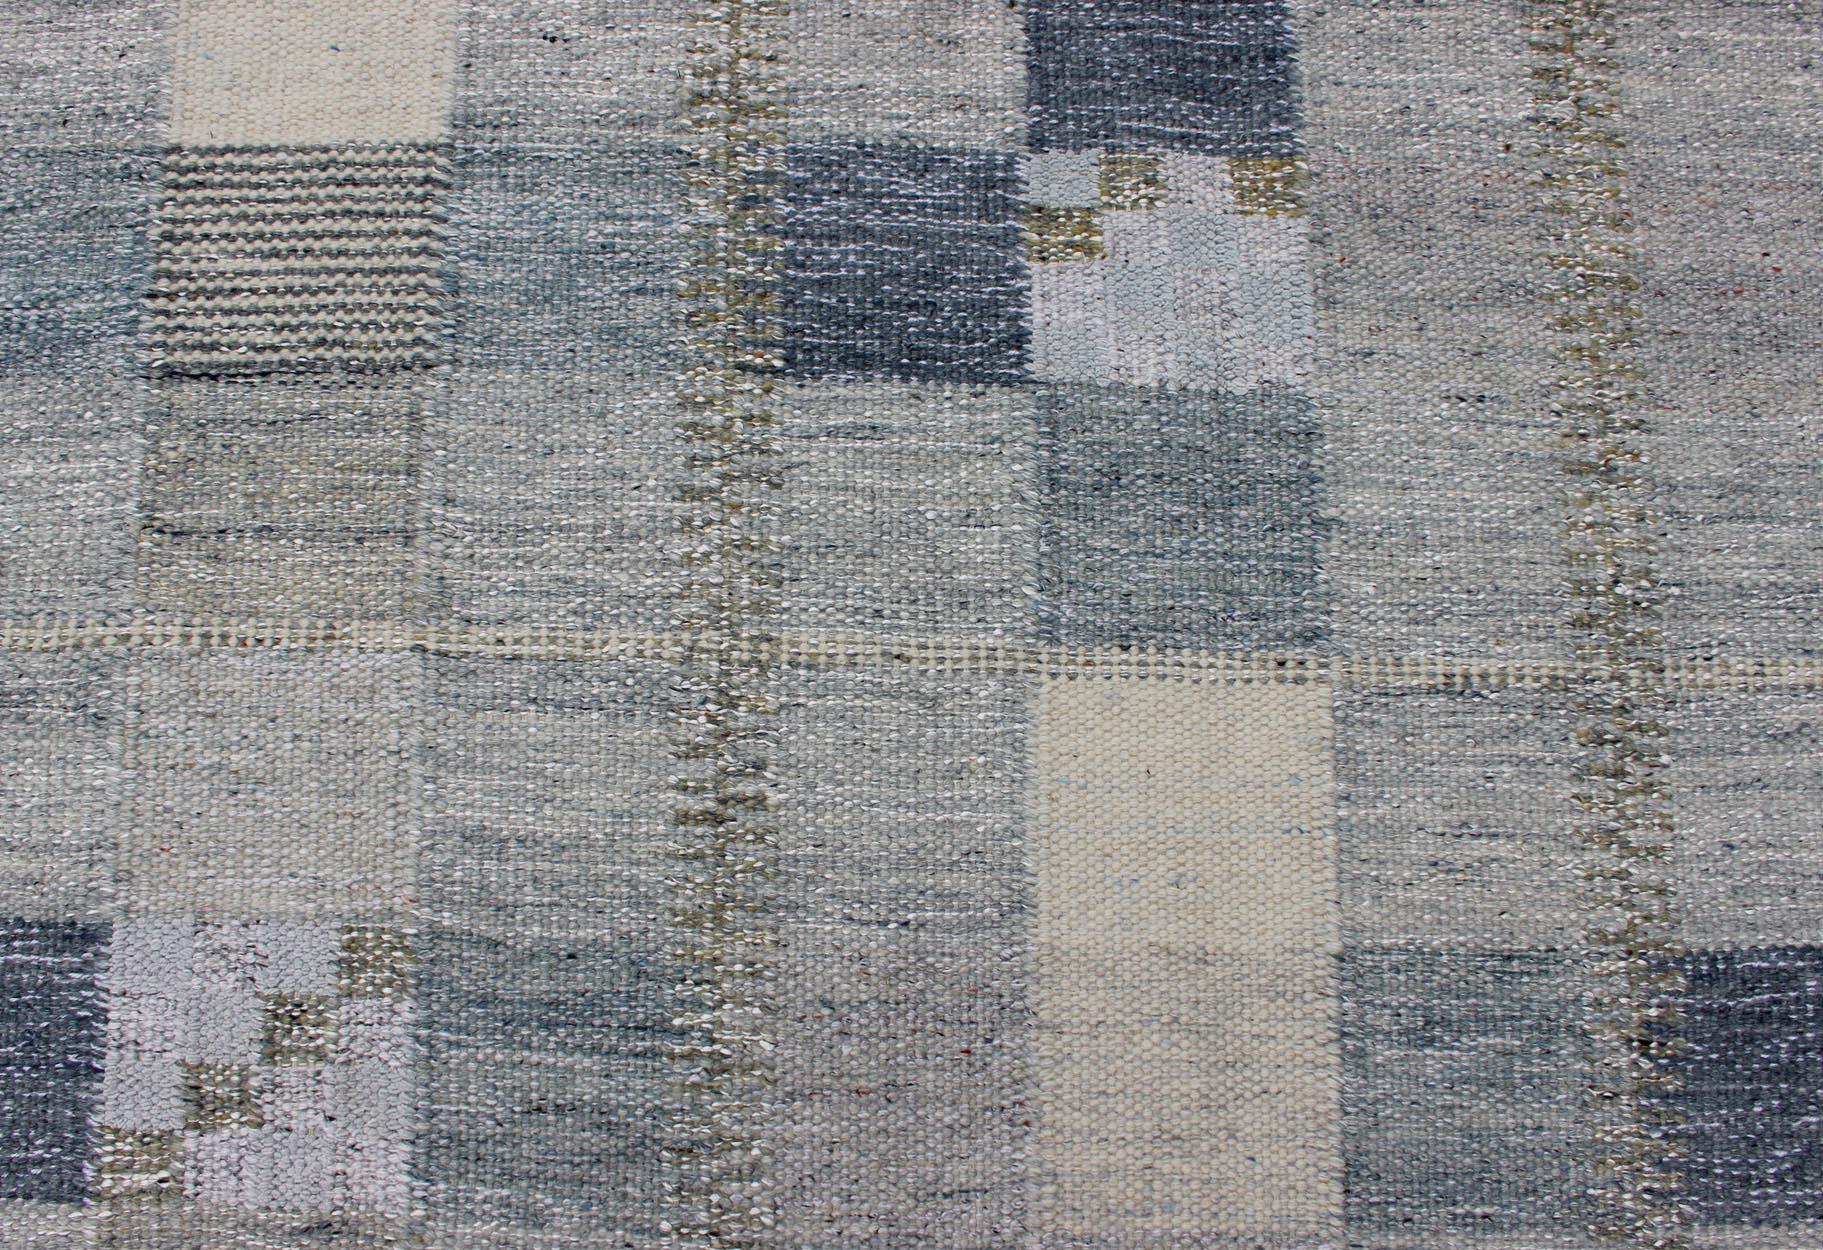 Wool Scandinavian Flat-Weave Design Rug with Checkerboard Design in Gray and Blue